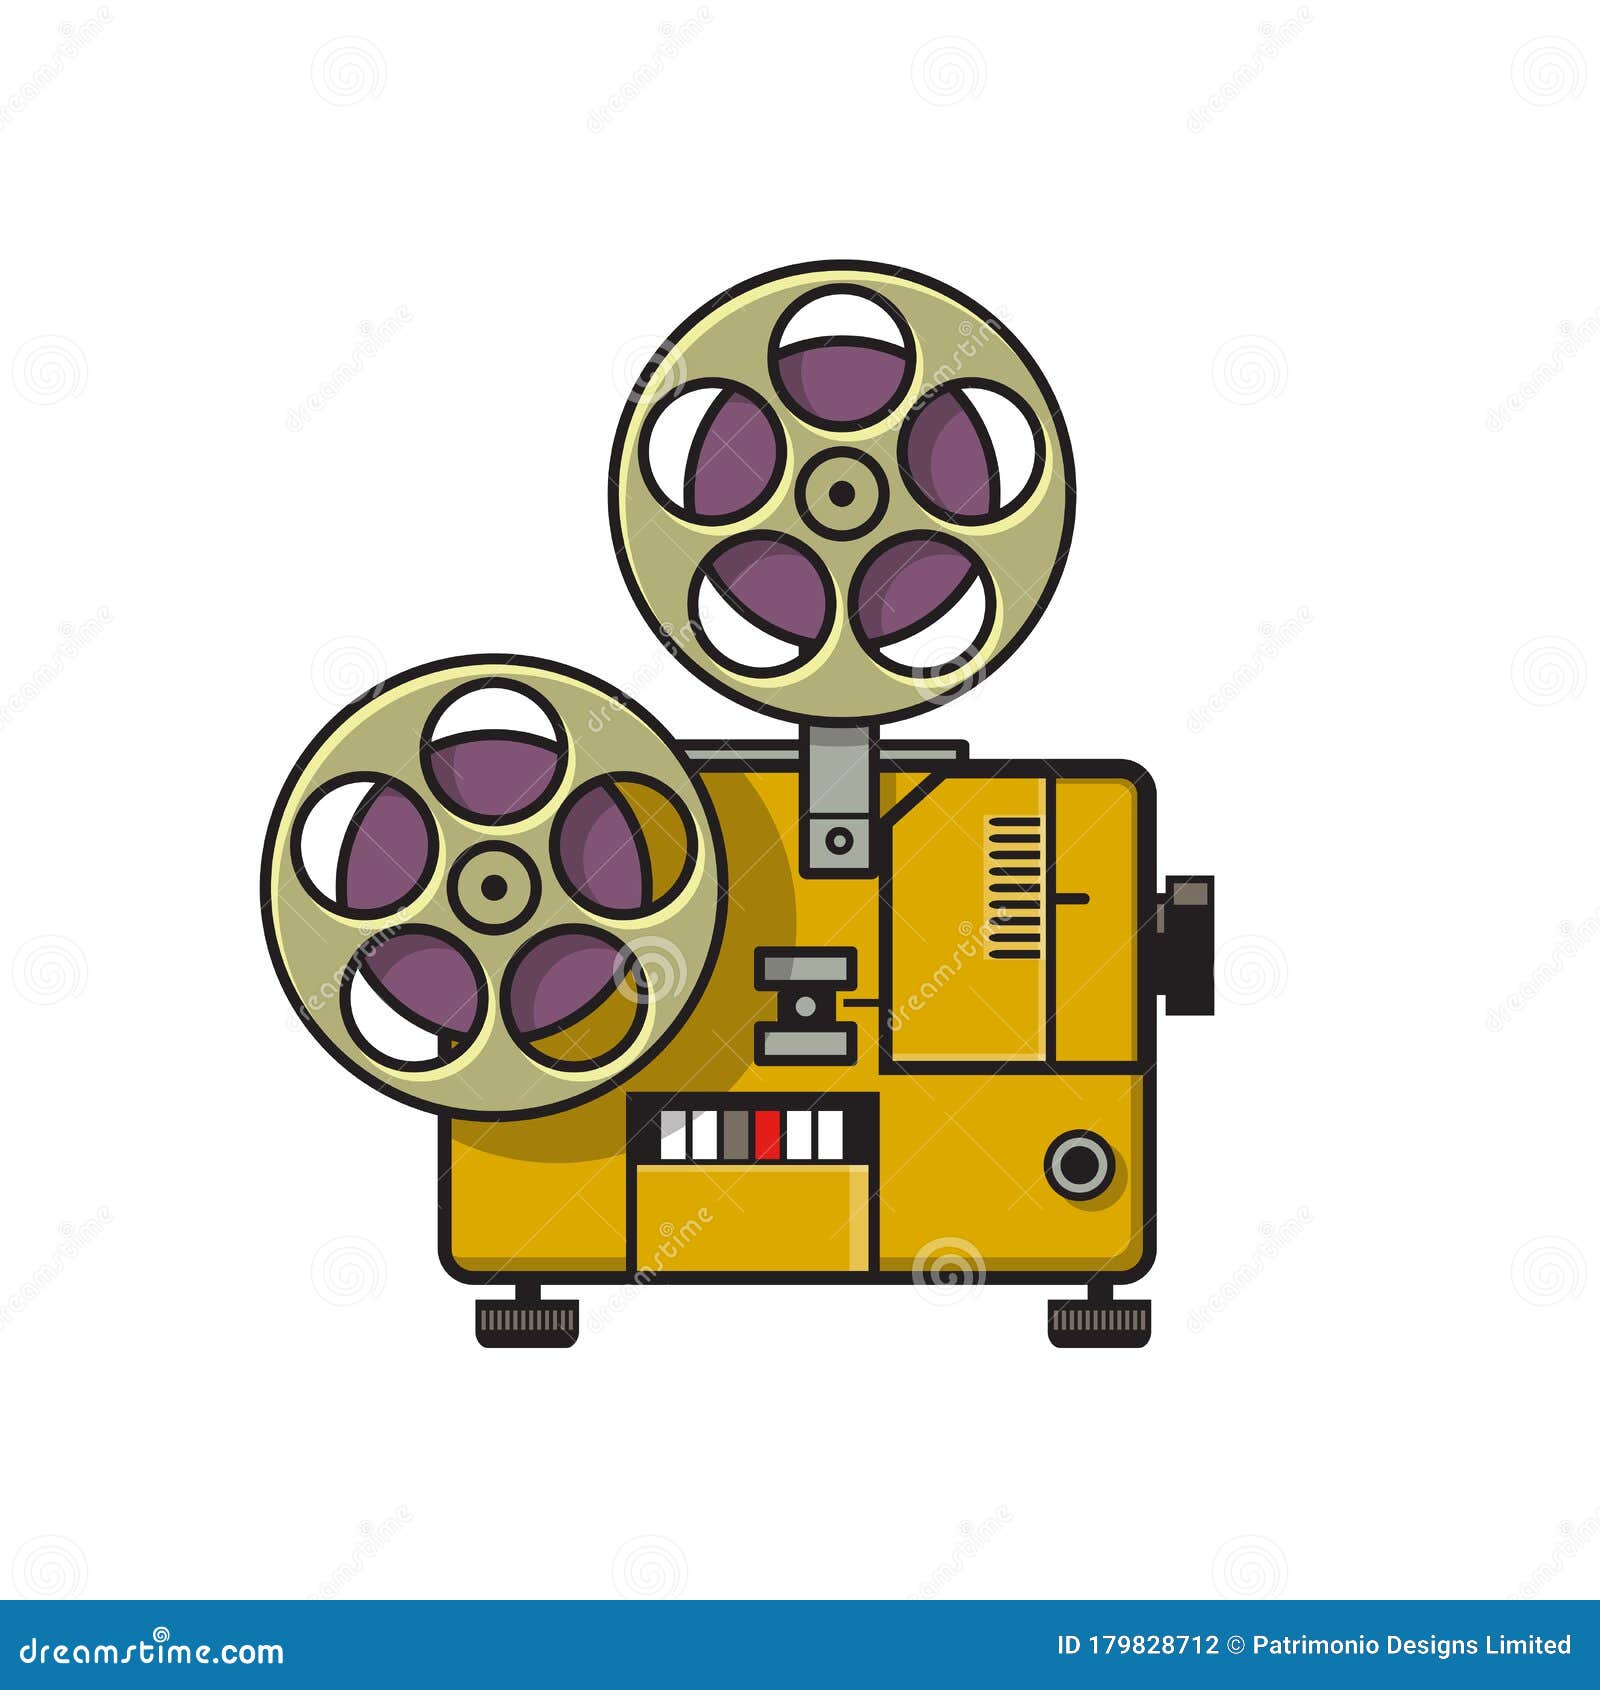 https://thumbs.dreamstime.com/z/retro-style-illustration-vintage-movie-film-reel-projector-viewed-side-done-full-color-isolated-background-vintage-179828712.jpg